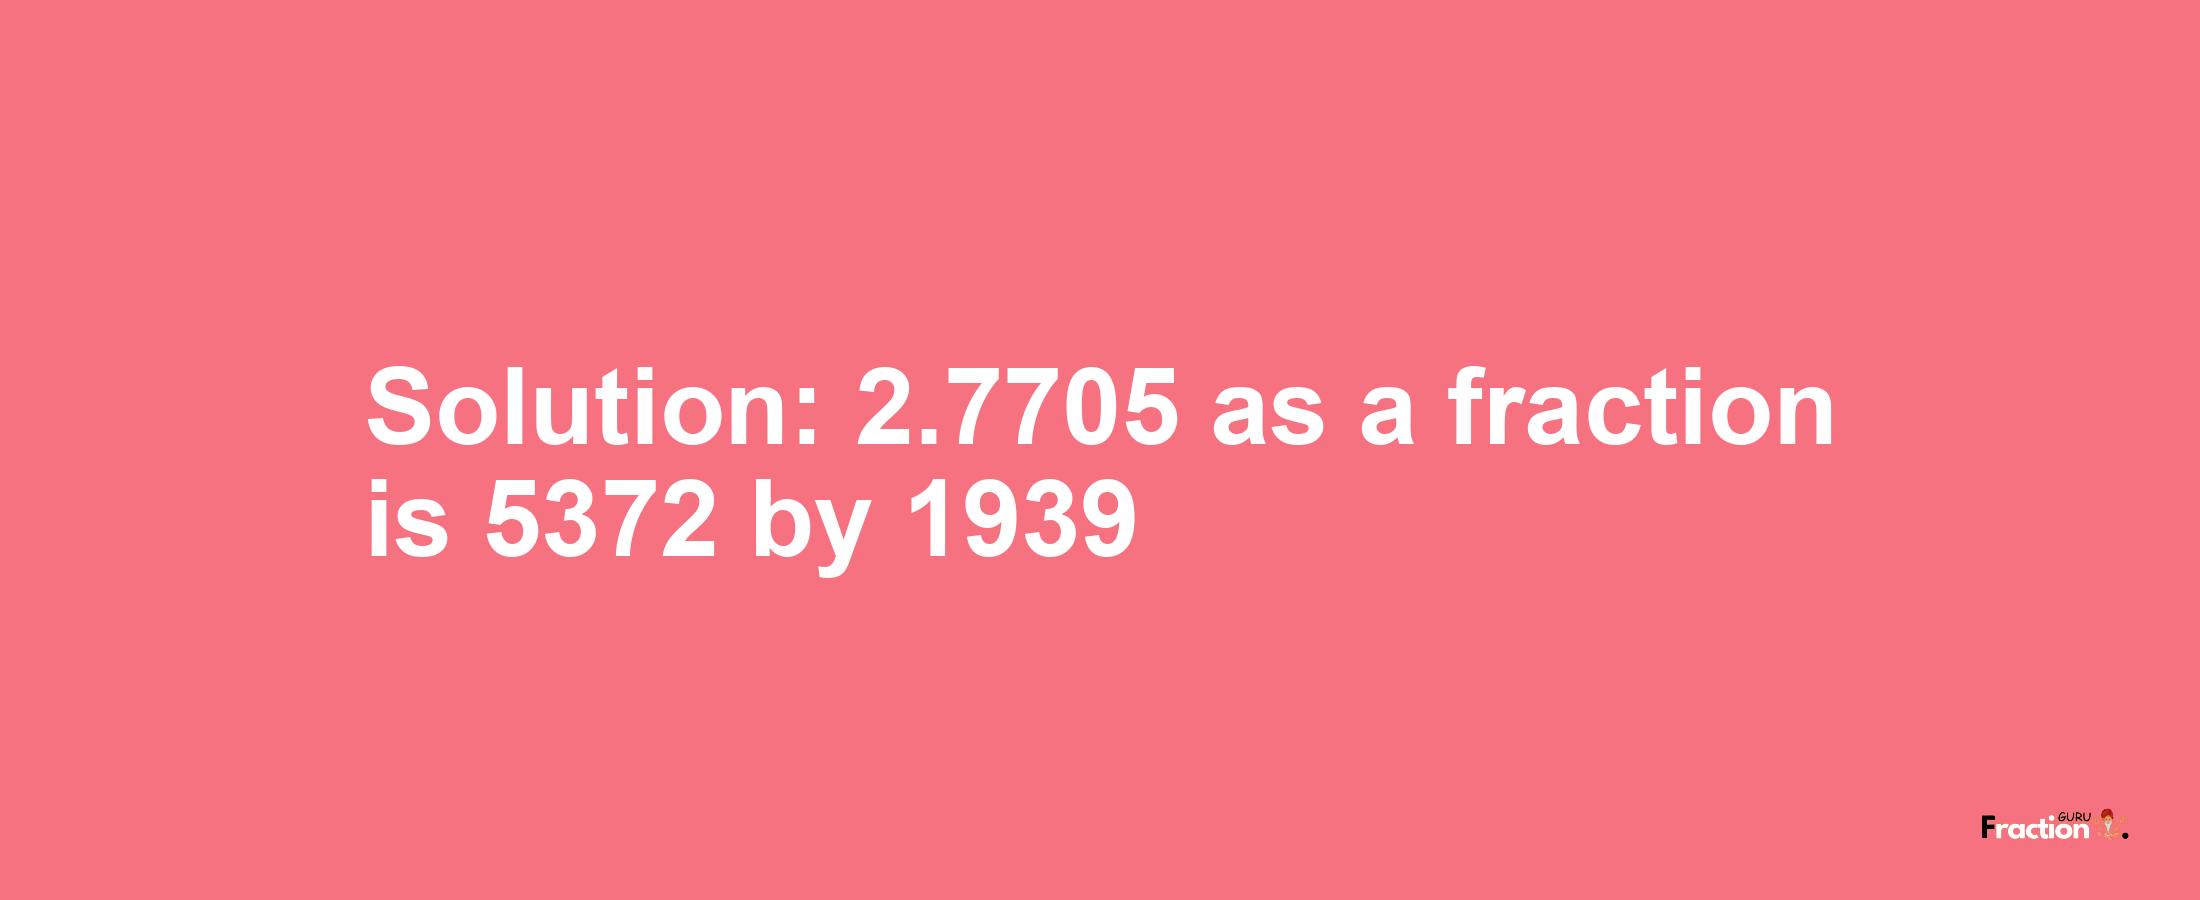 Solution:2.7705 as a fraction is 5372/1939